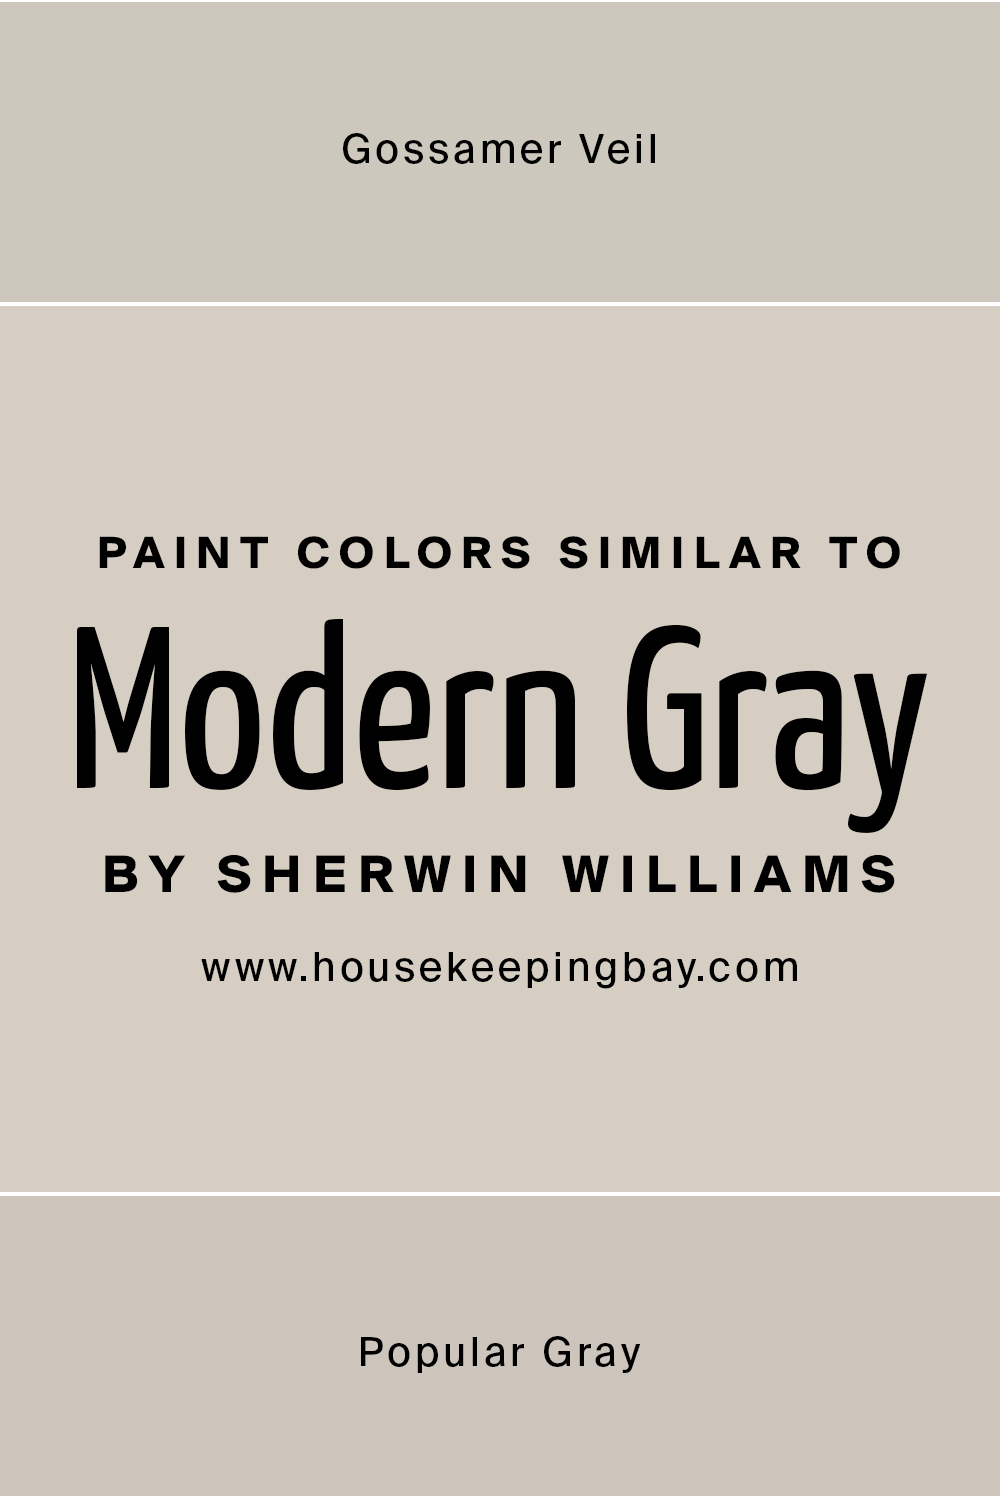 Paint Colors Similar to Modern Gray by Sherwin Williams